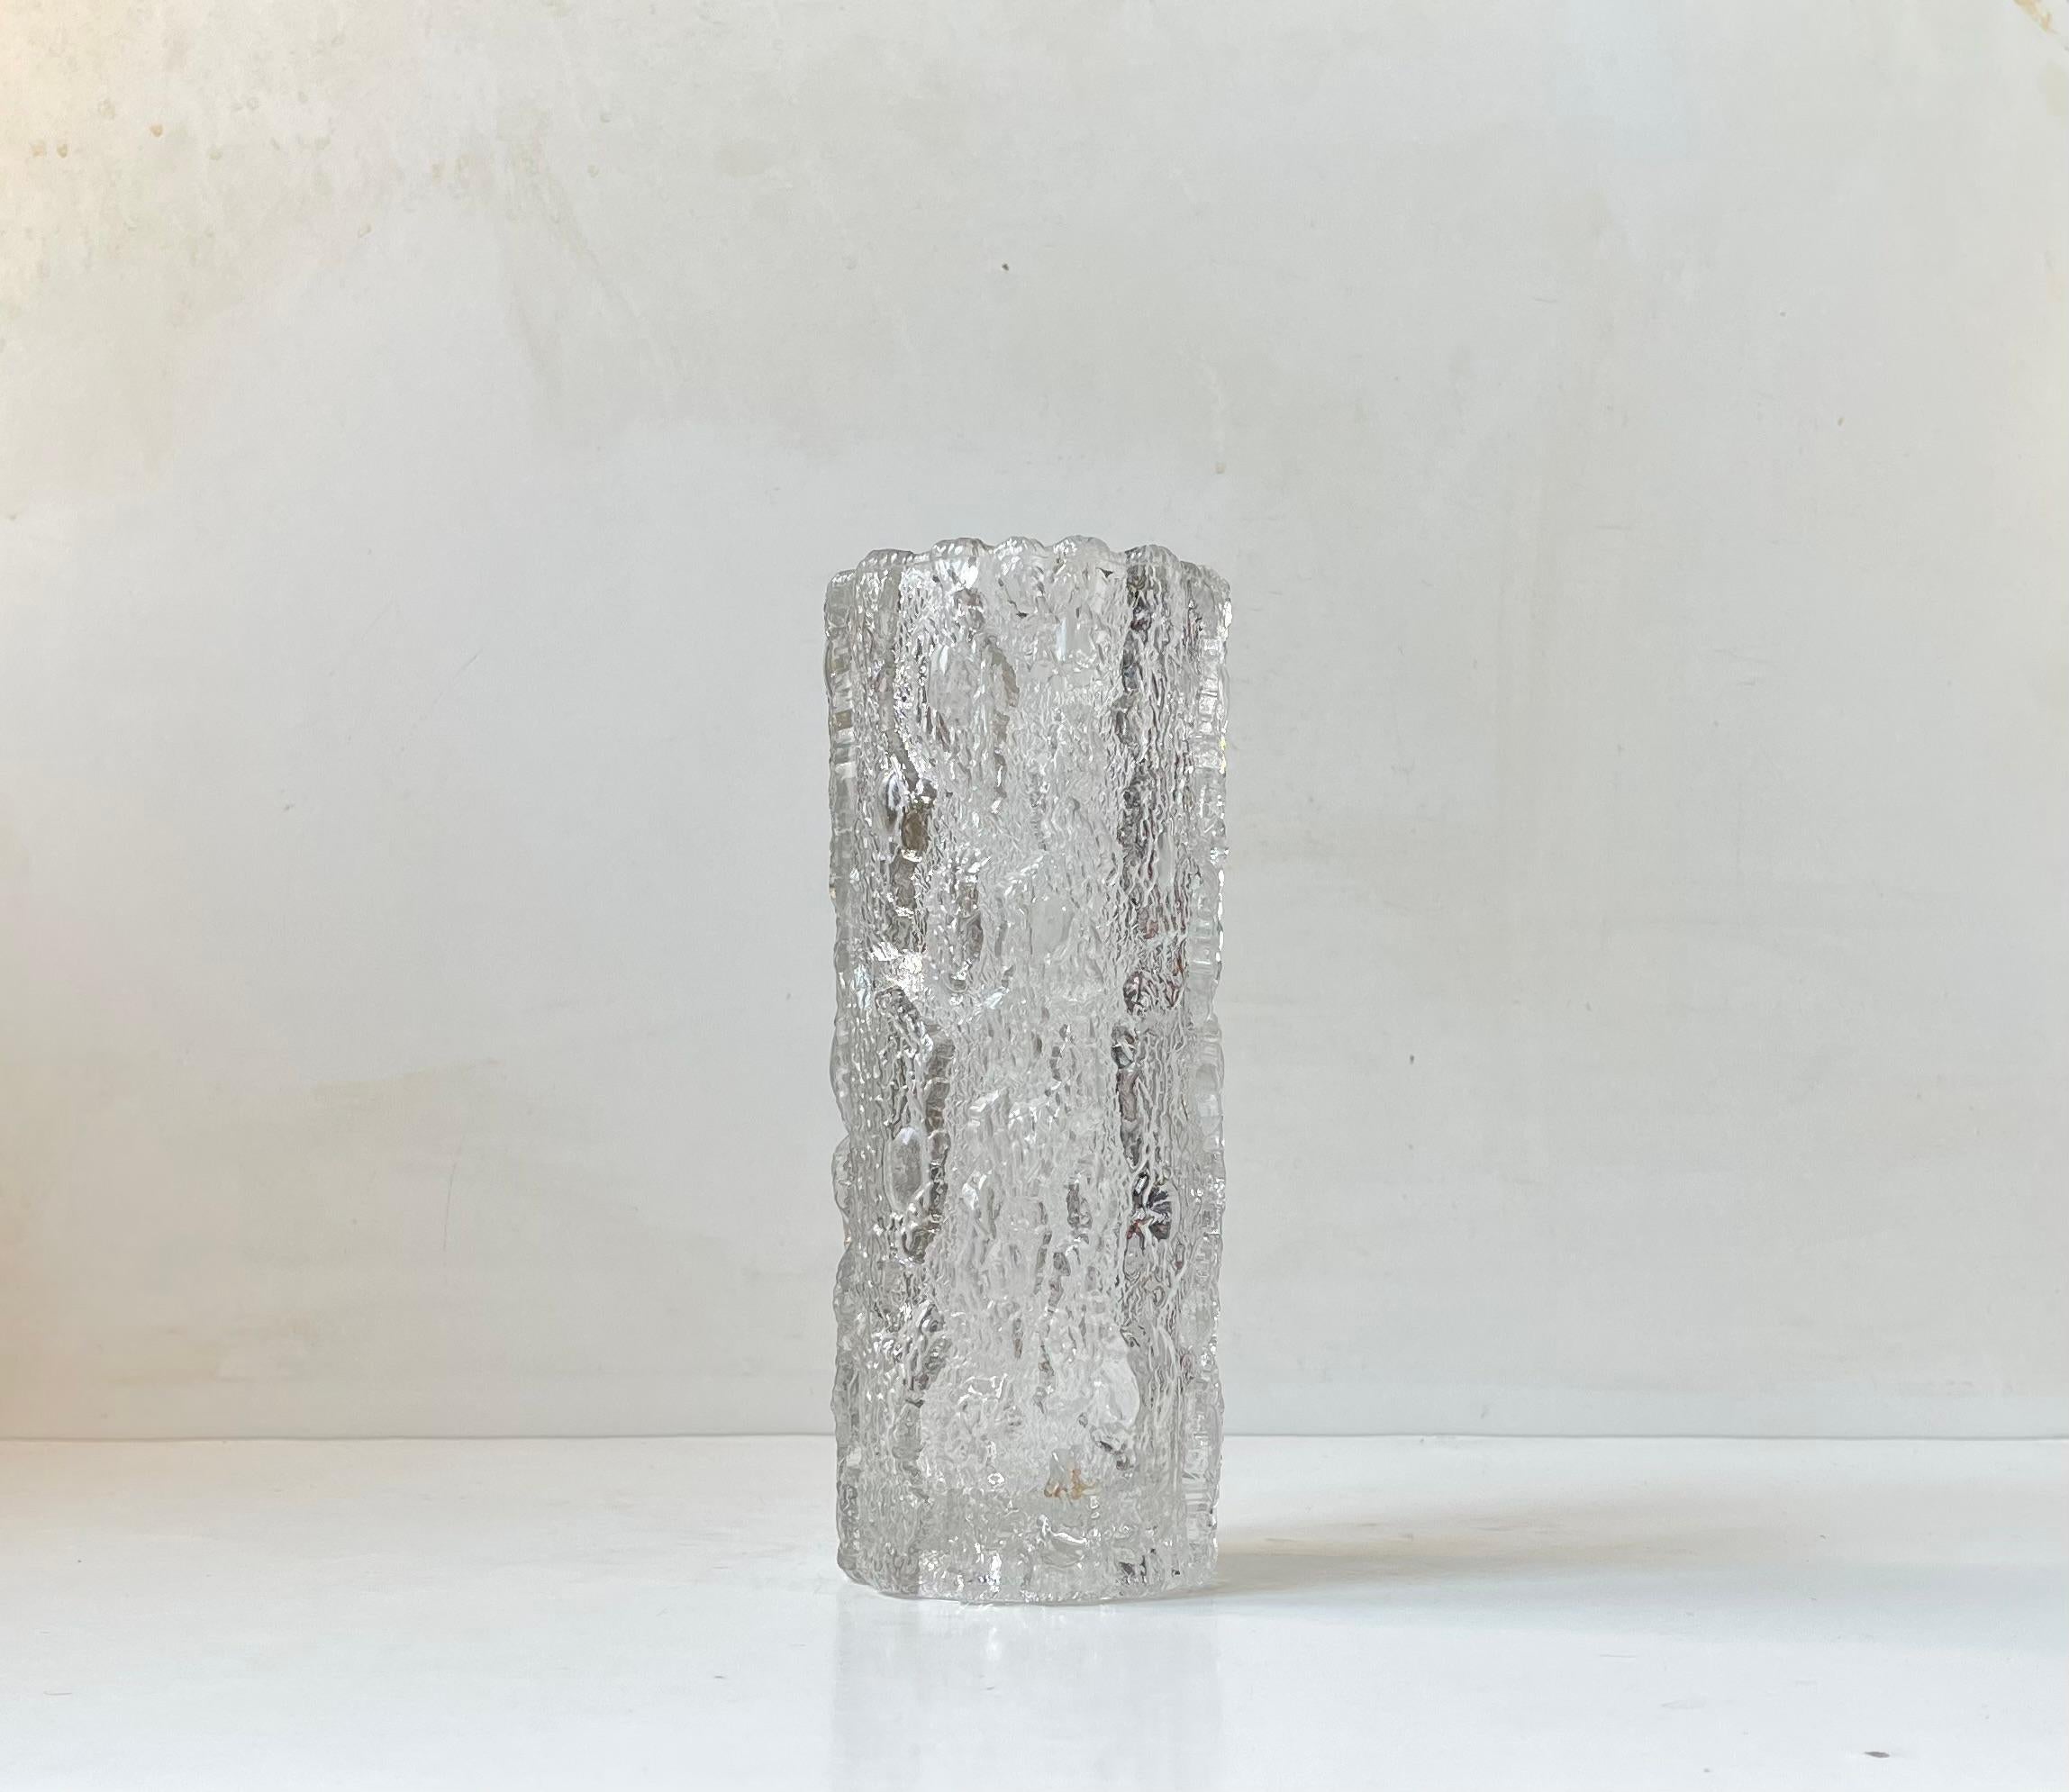 Rustic cylindrical crystal glass vase mimicking the ice of Arktis hence its name. Made by Georgshütte in Germany circa 1970-75. Wellkept and clean condition. Reminiscent in style to Tapio Wirkkala and Littala in particular. Measurements: H: 21,5 cm,